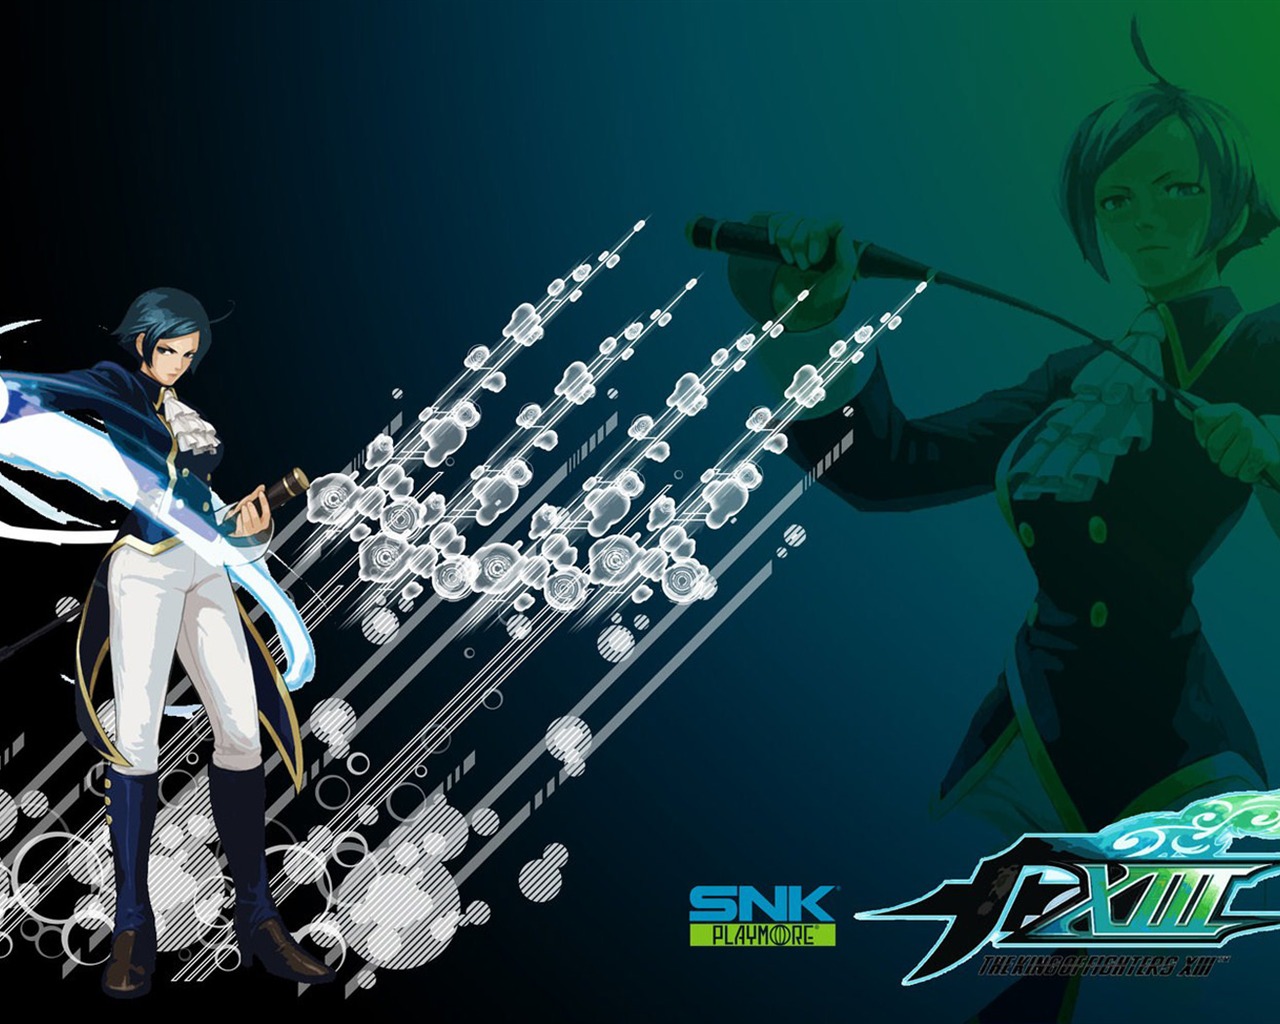 The King of Fighters XIII 拳皇13 壁纸专辑11 - 1280x1024